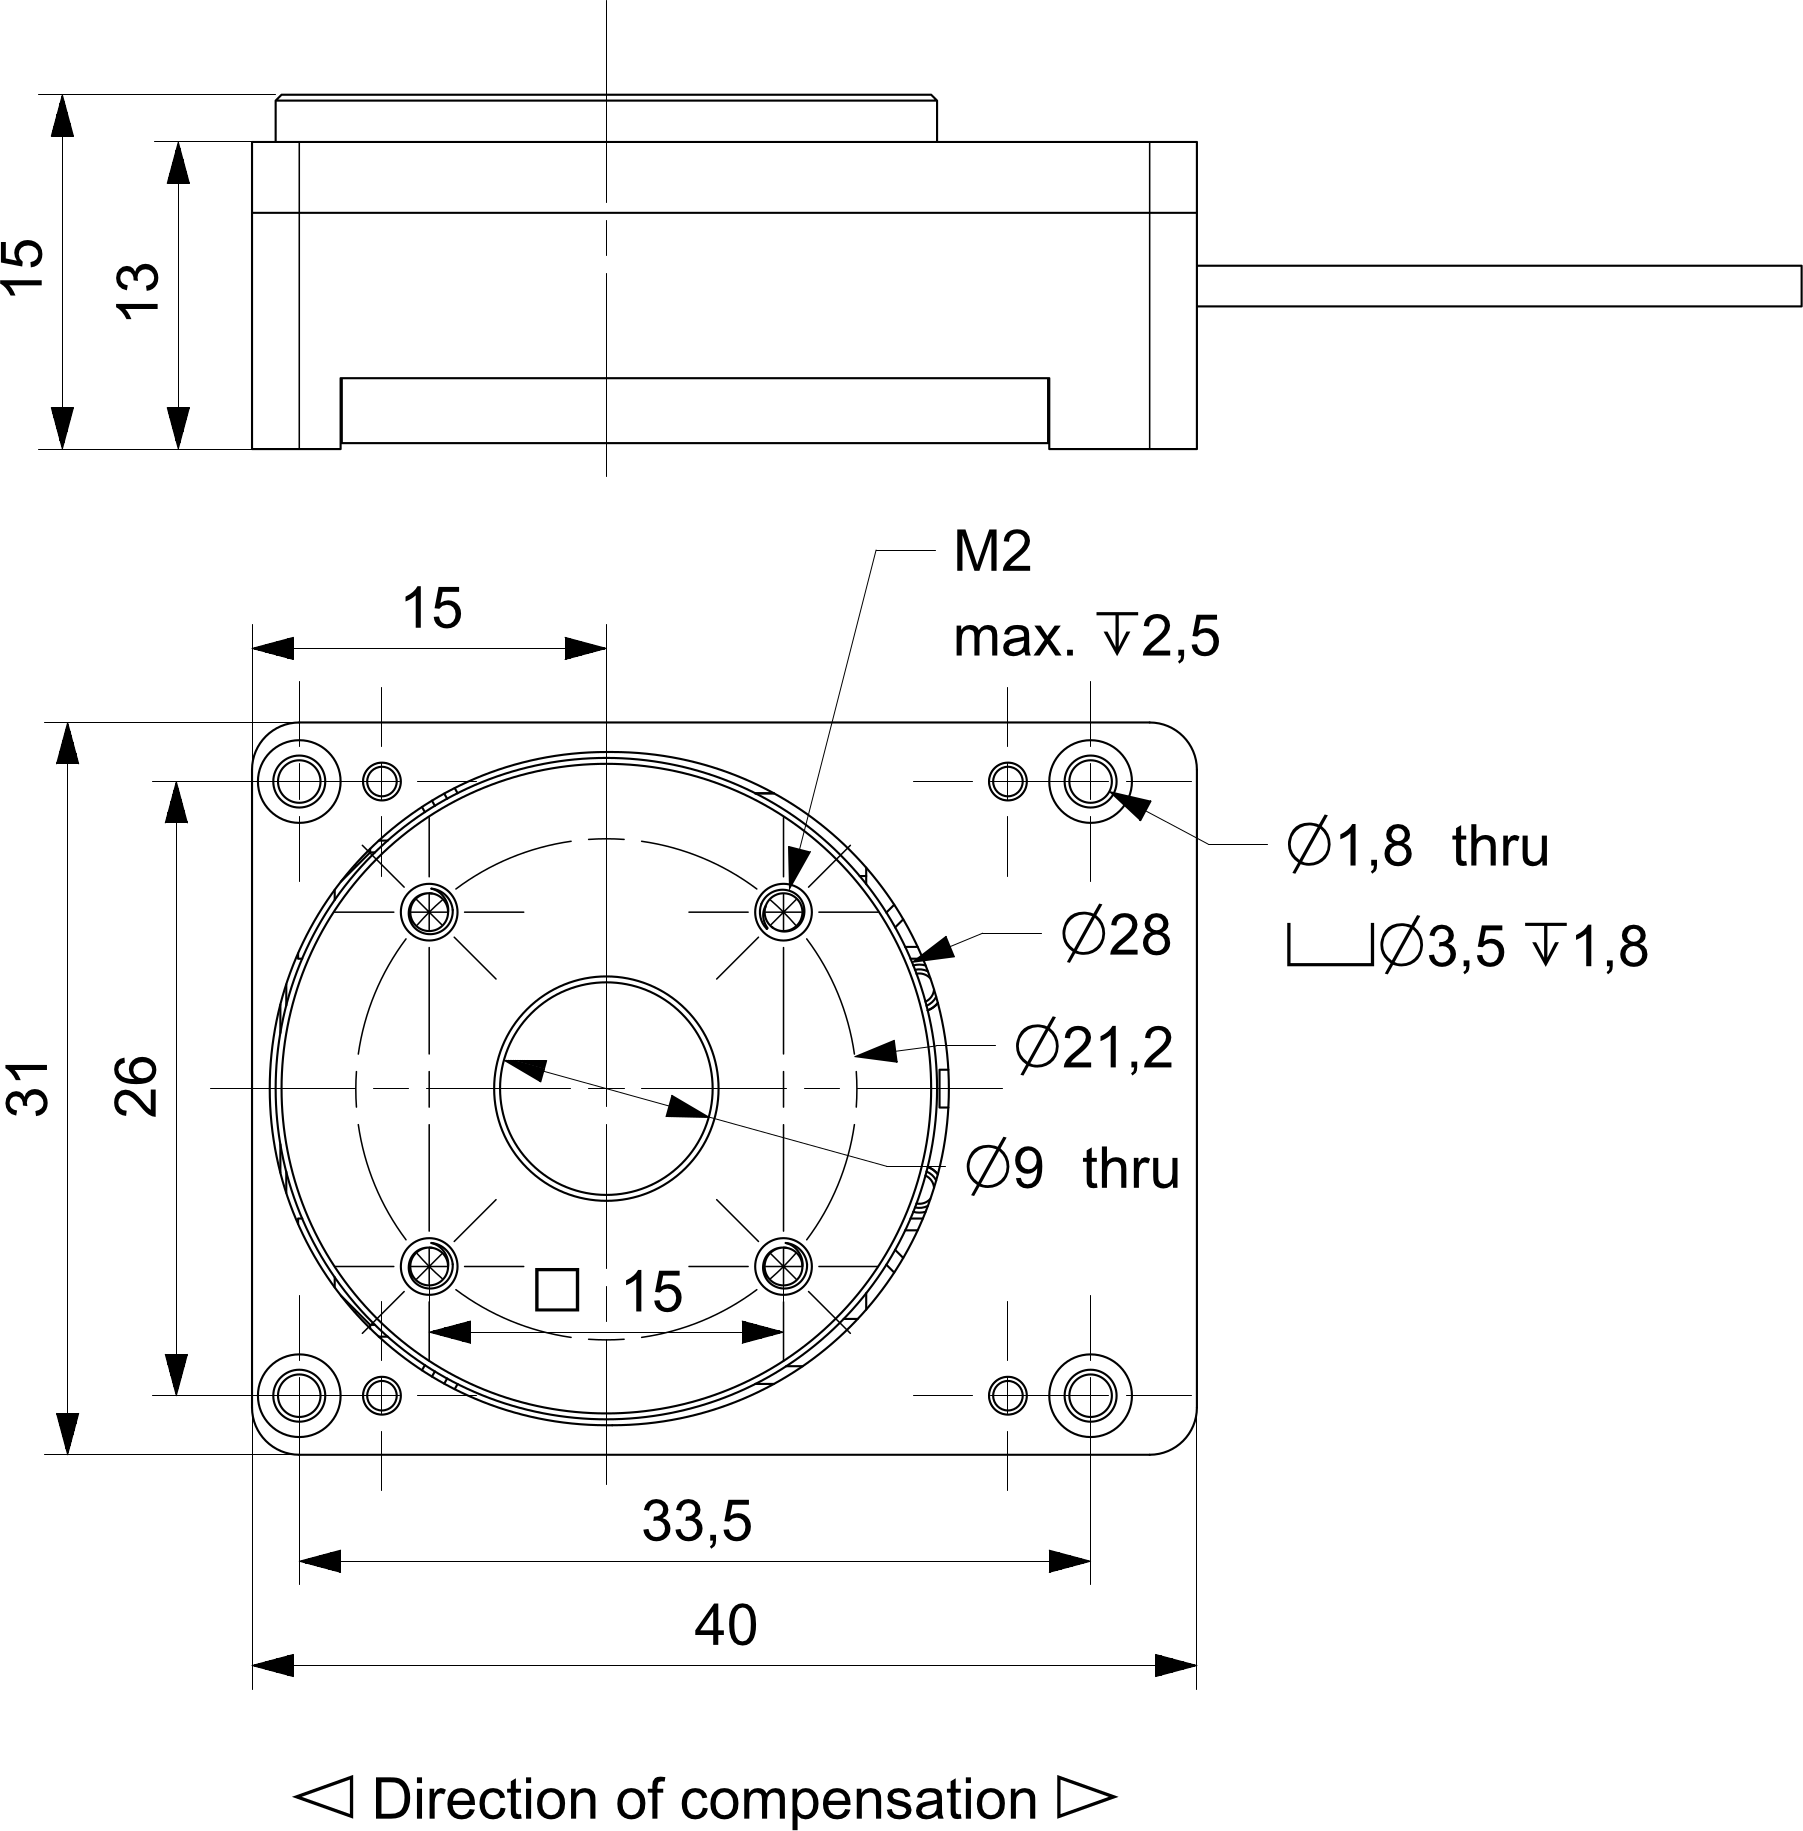 xrt-a rotation stage dimensions